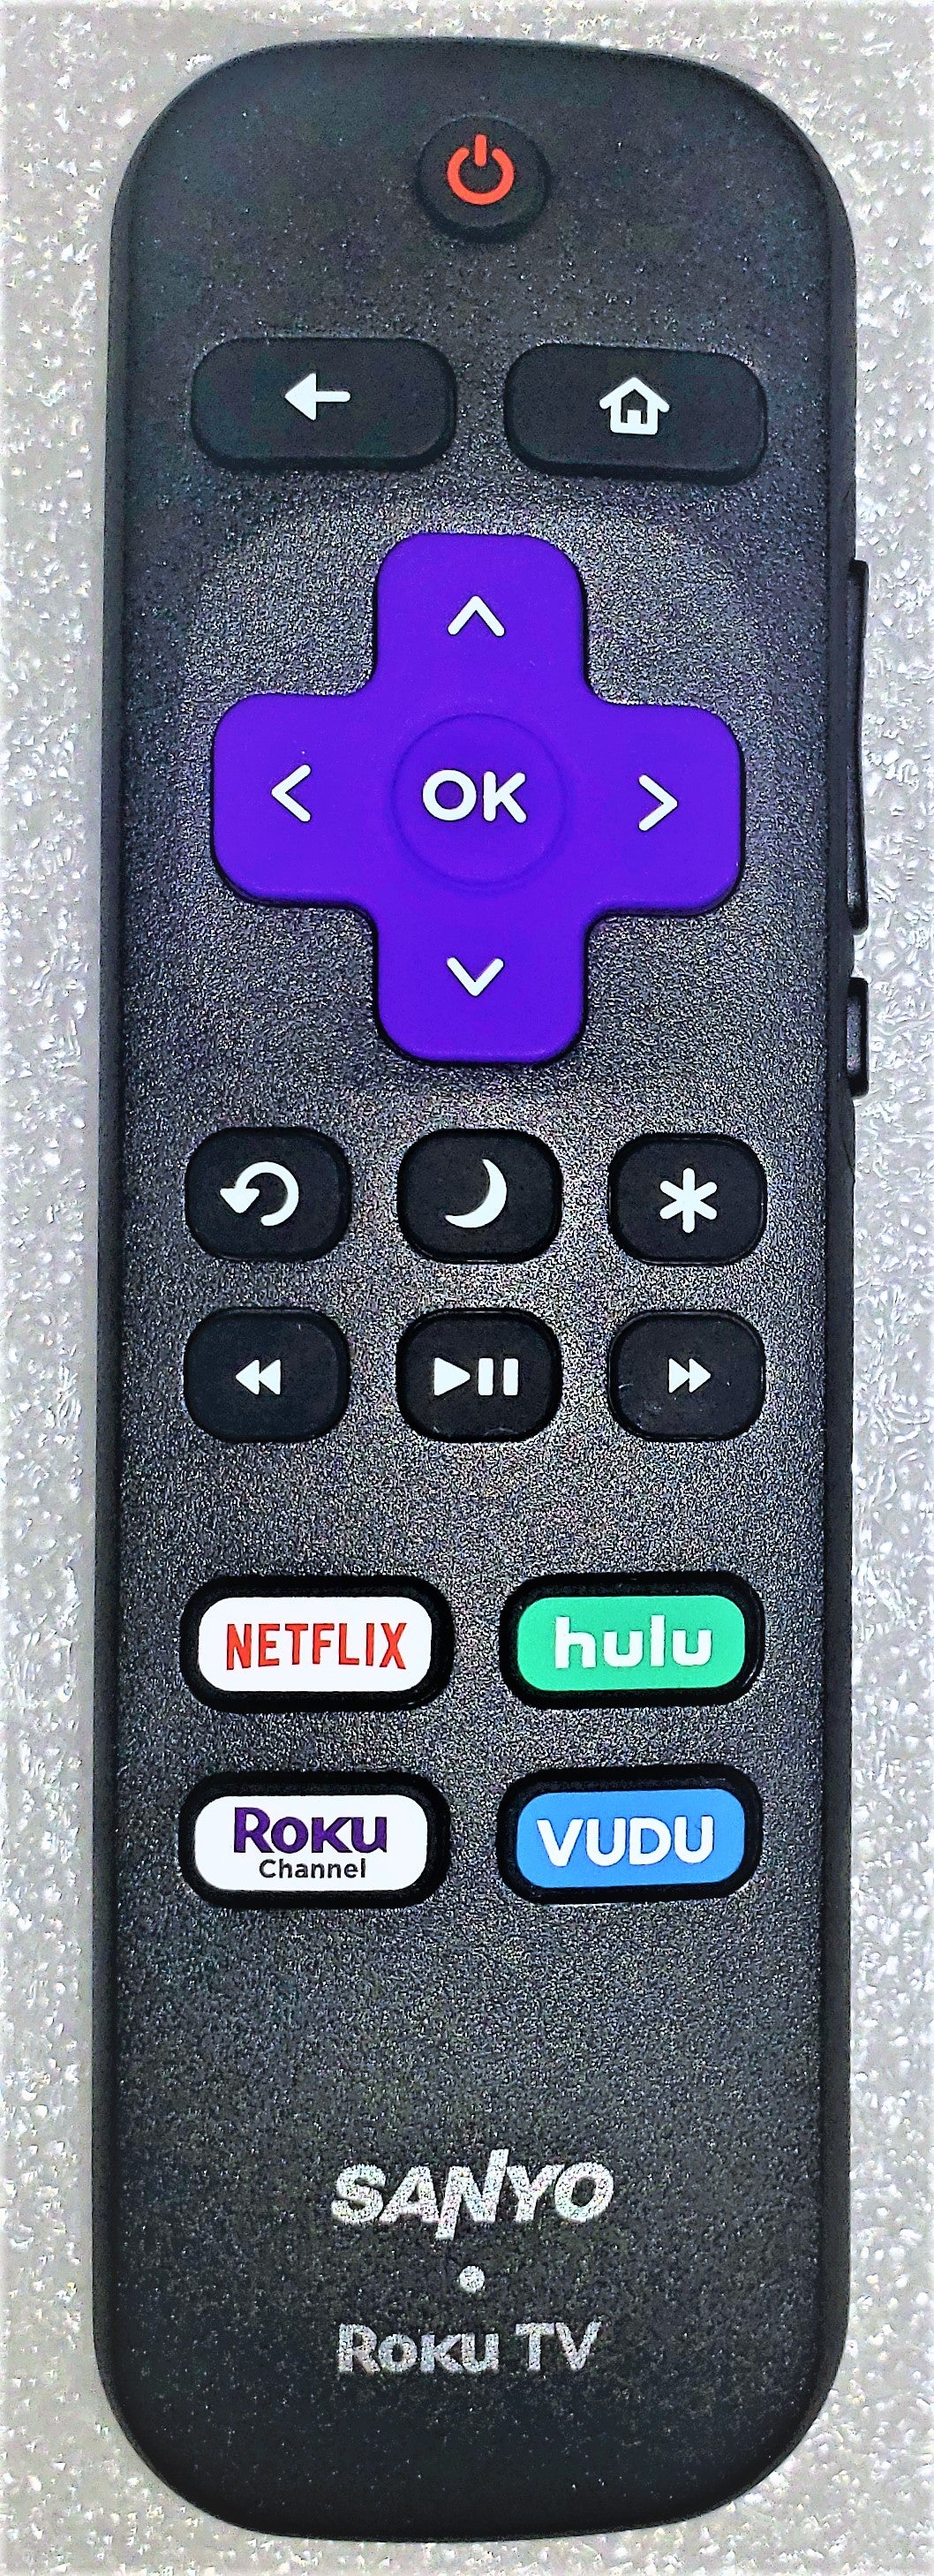 OEM replacement remote control for Sanyo Roku TV URMT21CND013